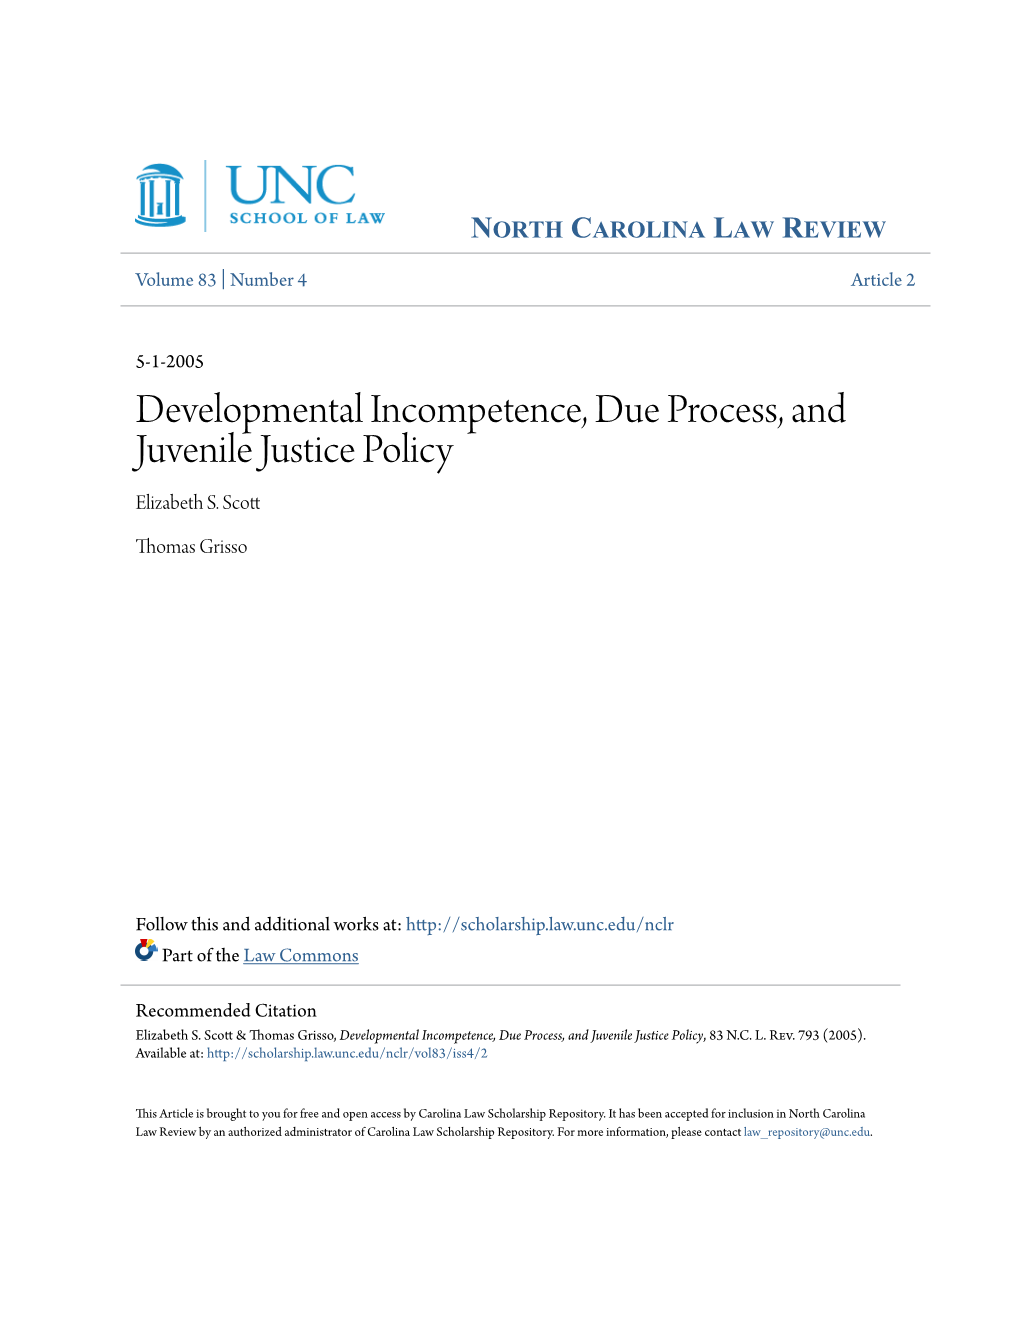 Developmental Incompetence, Due Process, and Juvenile Justice Policy Elizabeth S